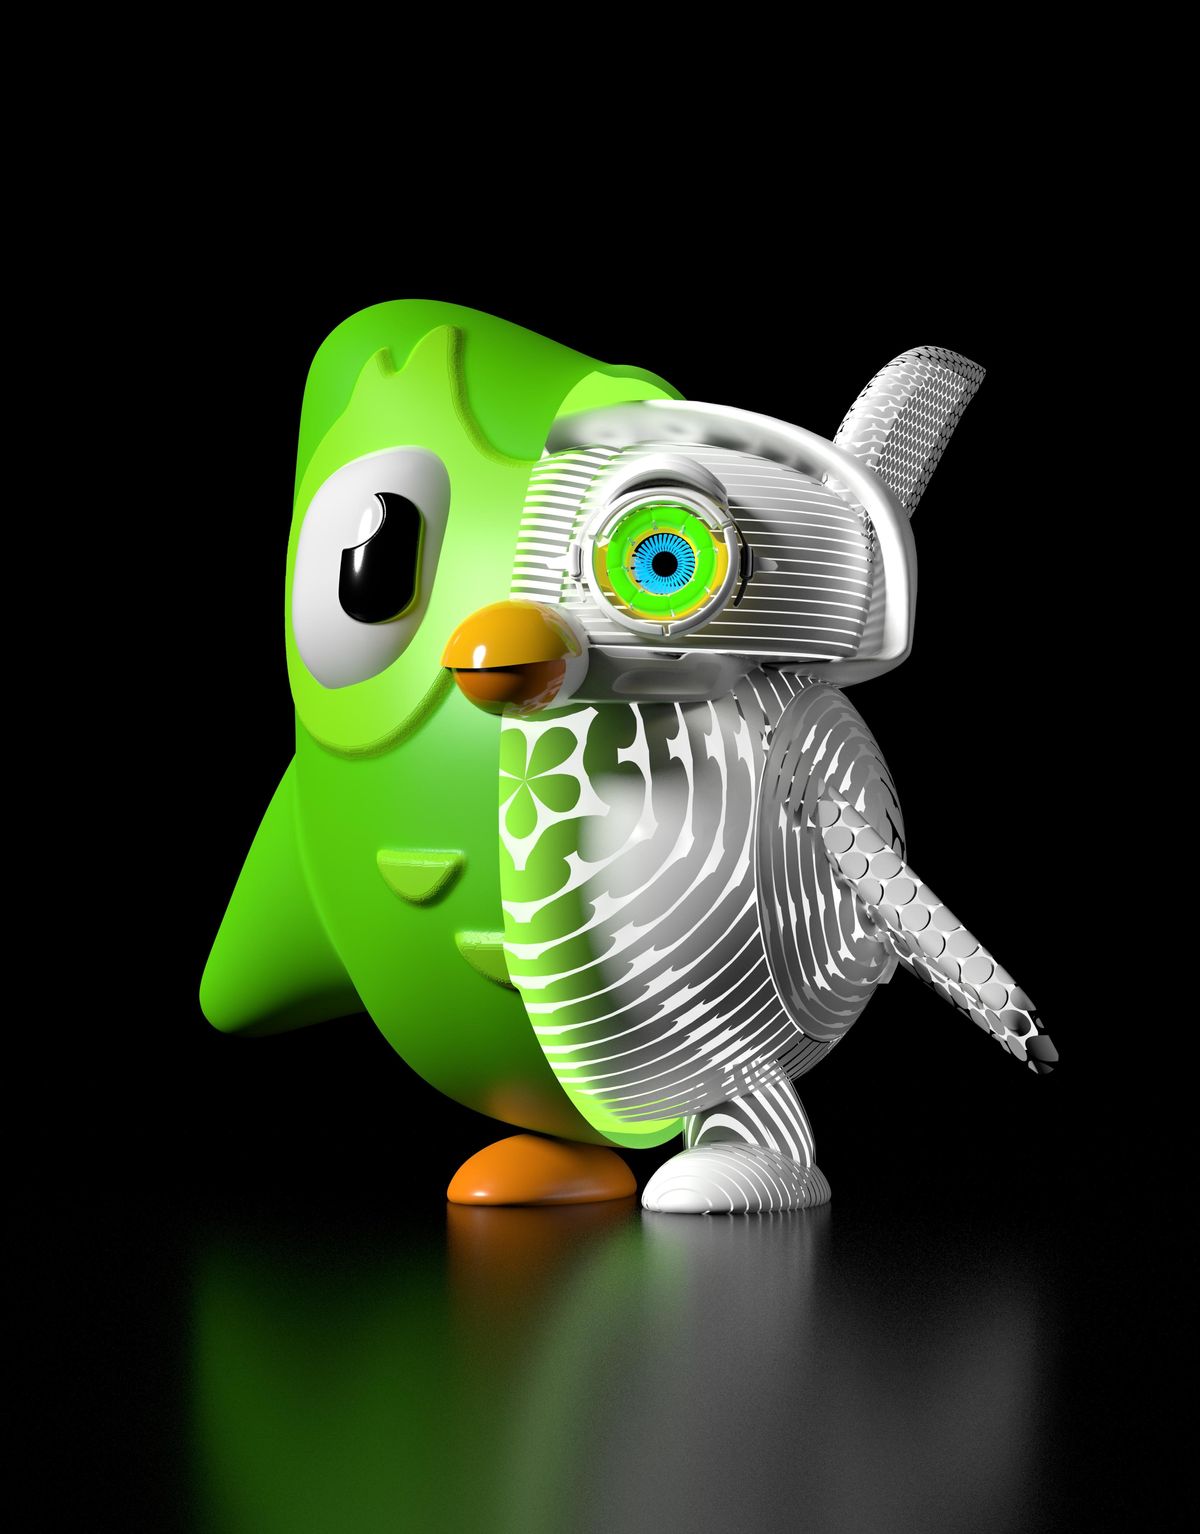 This playful illustration shows Duolingo’s owl mascot, cut away down the midline, showing hidden inside a high-tech skeleton suggestive of some sort of AI robot.